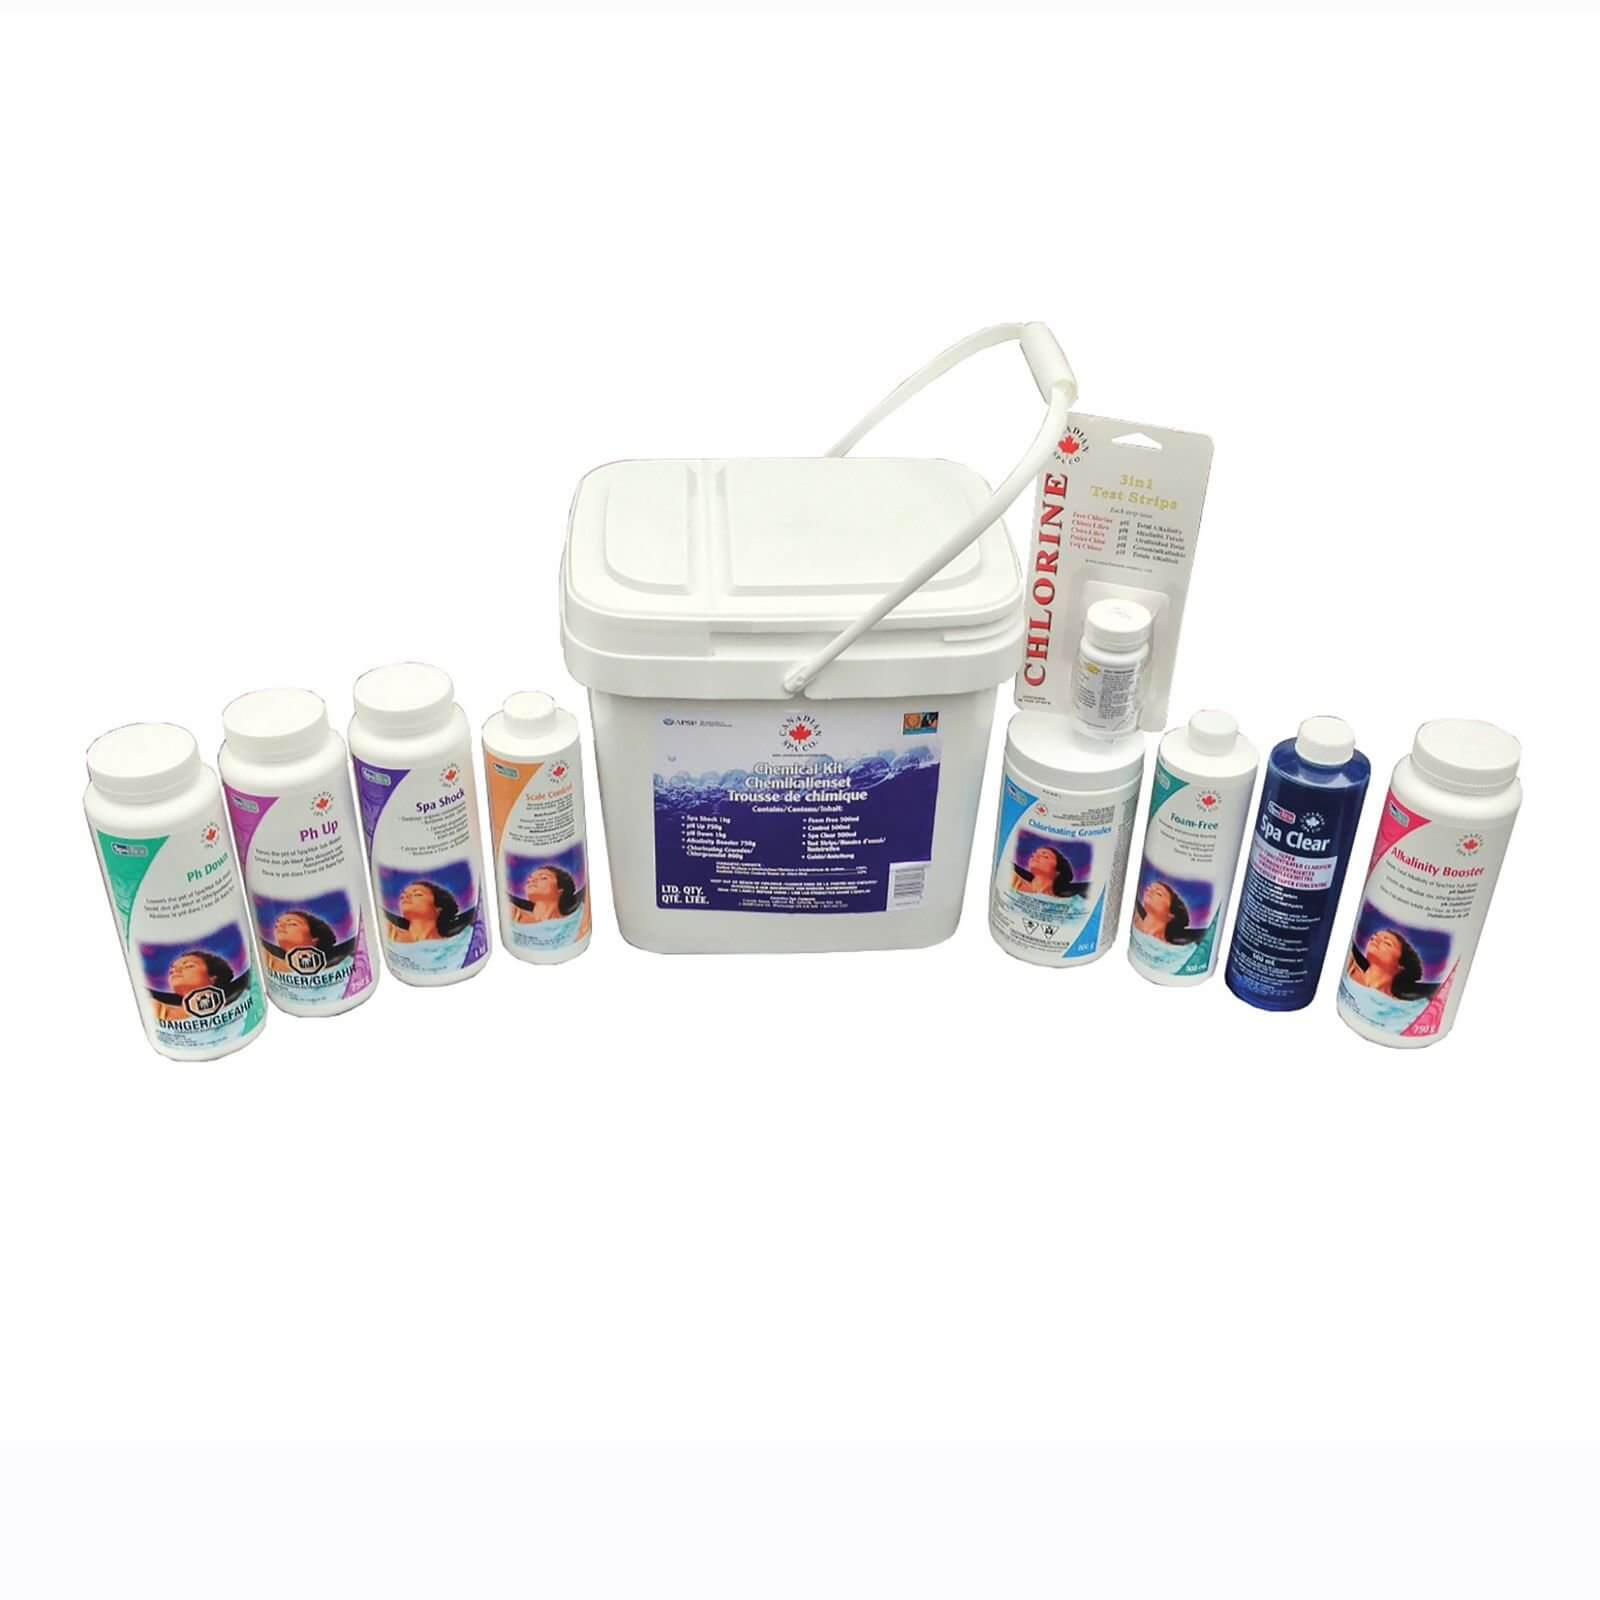 Canadian Spa Company Deluxe Spa Chemical Kit